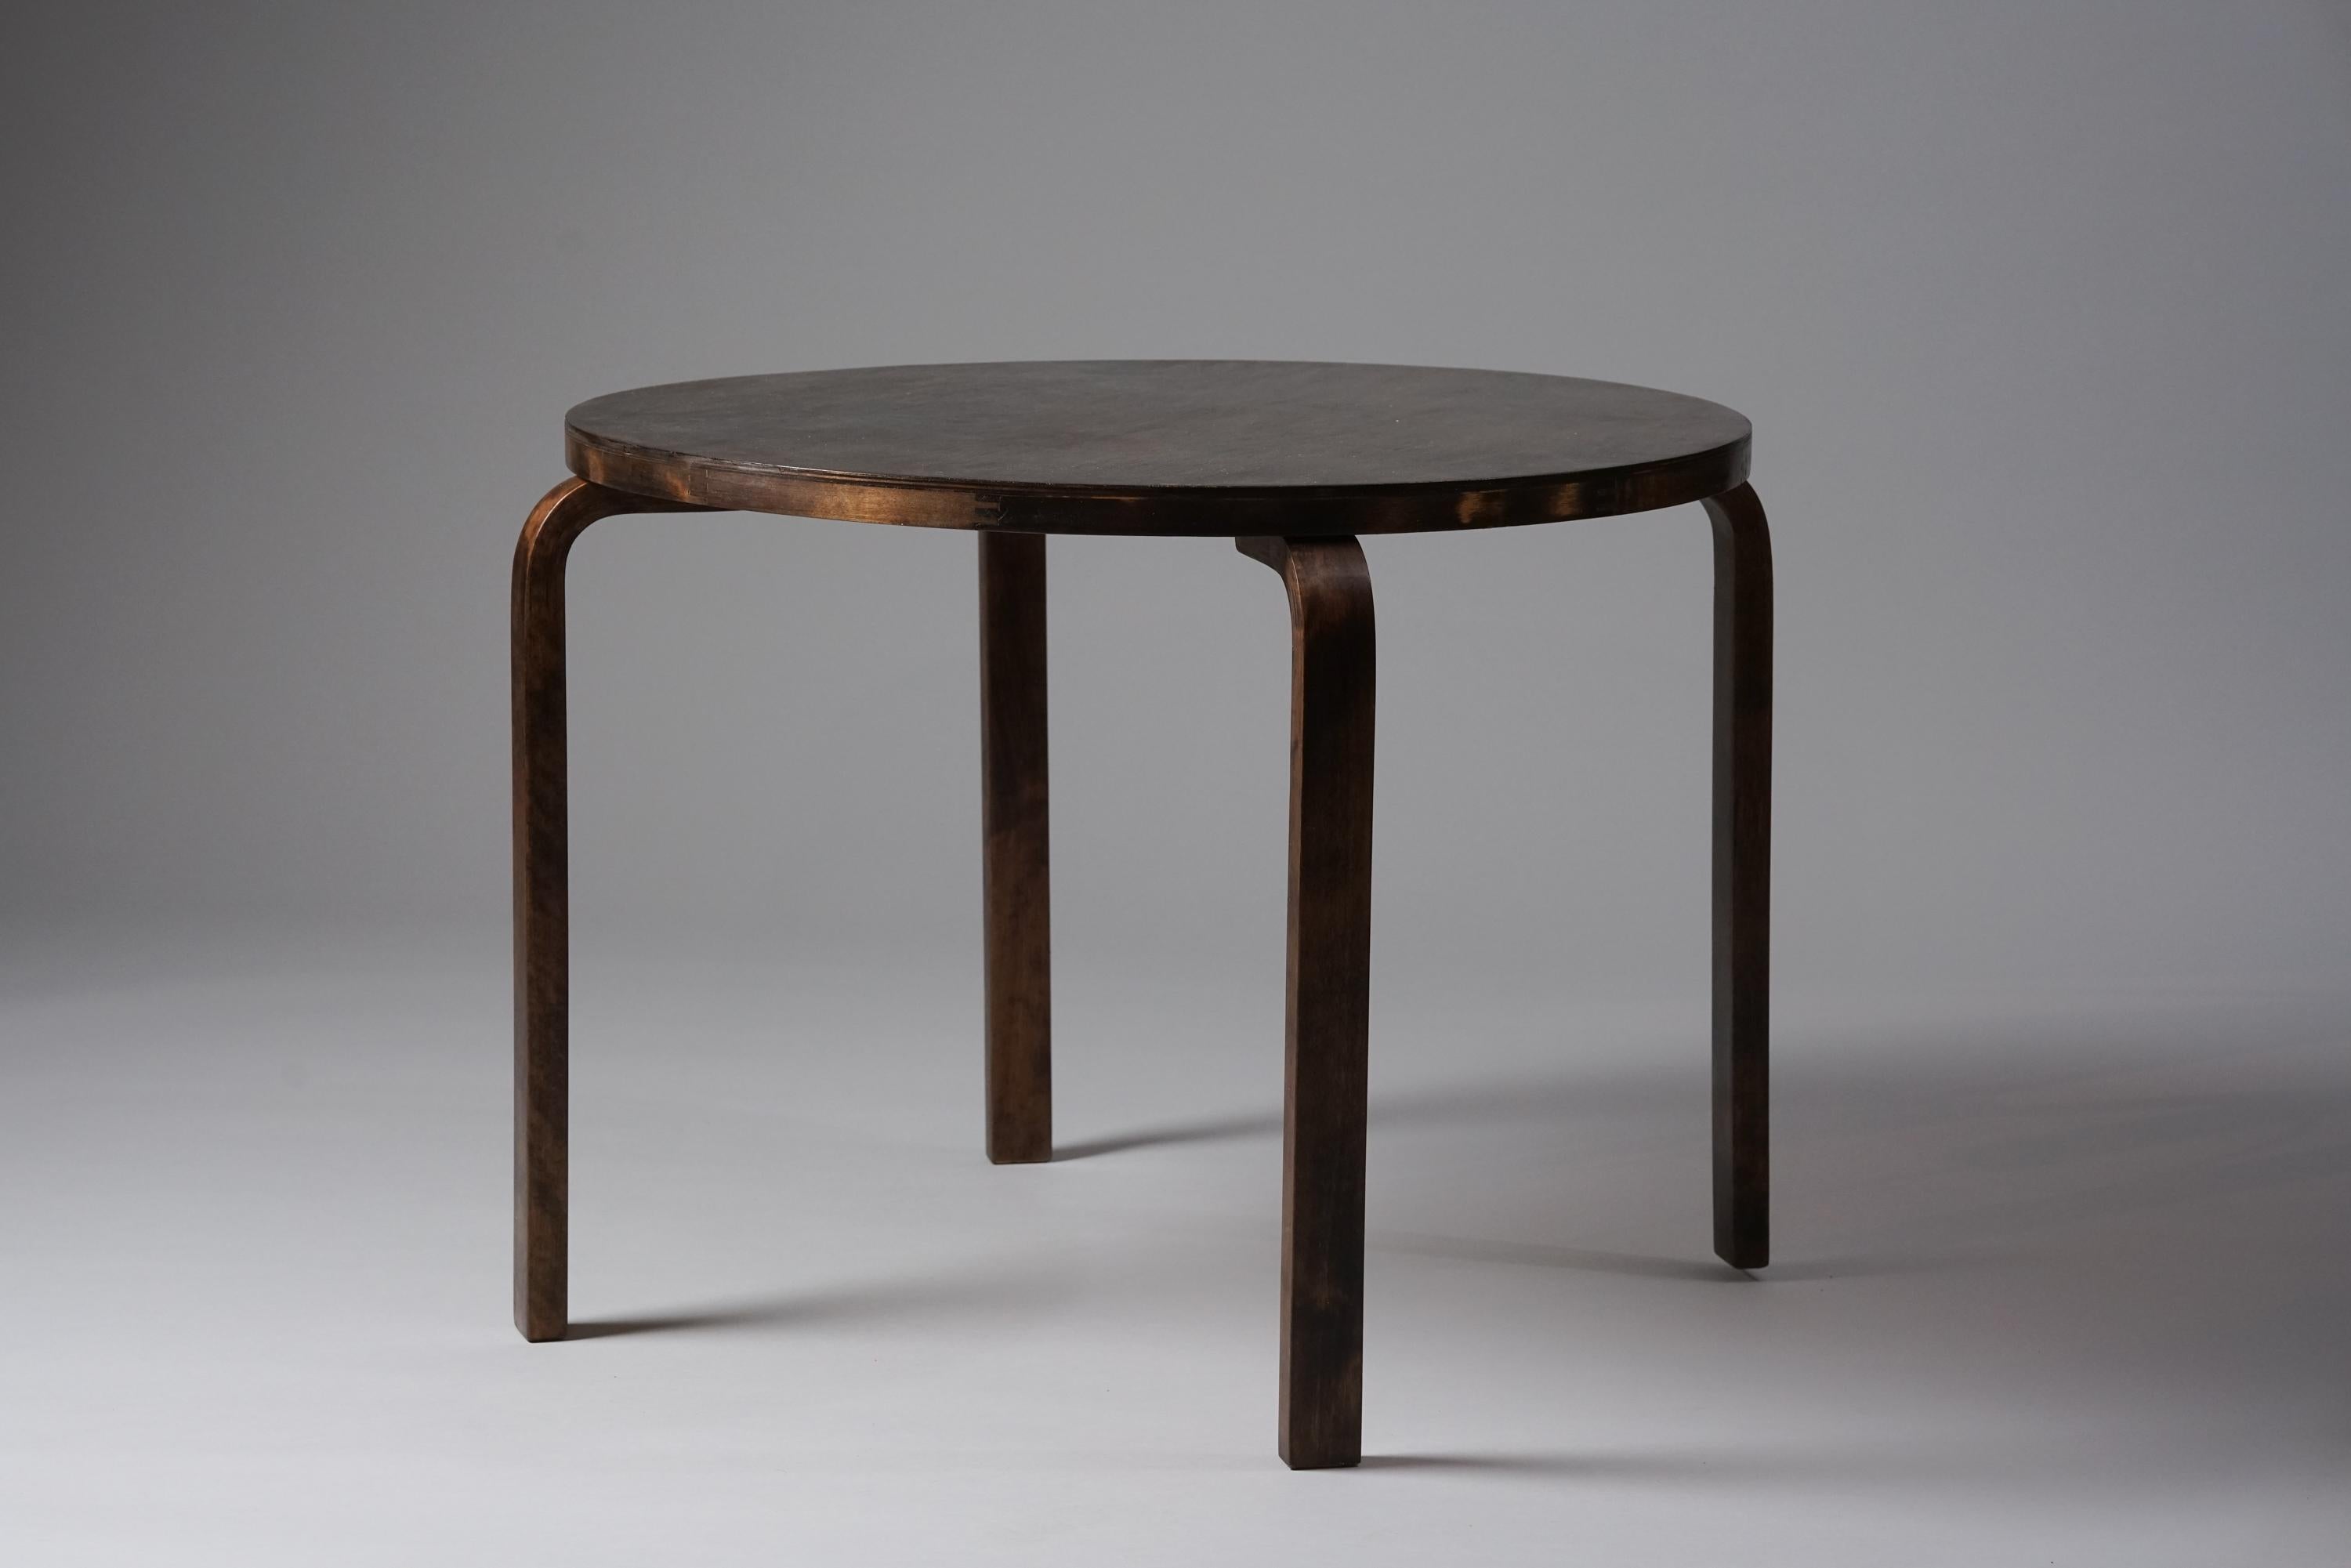 Alvar Aalto coffee table, manufactured by Oy Huonekalu- ja Rakennustyötehdas Ab, 1930s. Stained birch. Good vintage condition, minor patina consistent with age and use. 

Alvar Aalto (1898-1976) is probably the most famous Finnish architect and